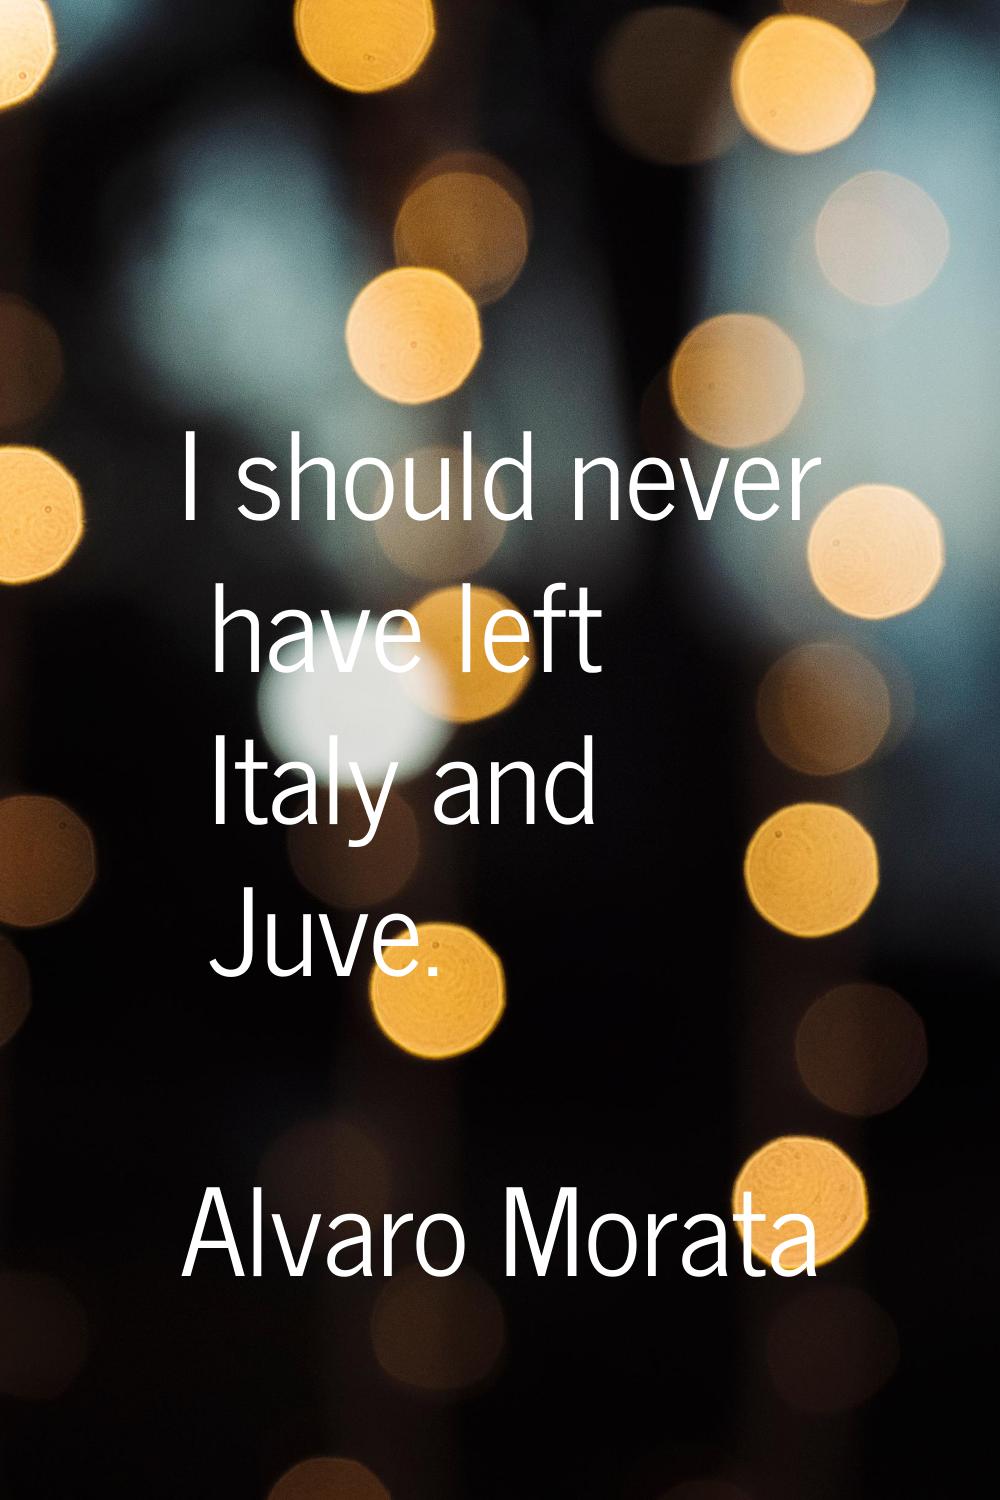 I should never have left Italy and Juve.